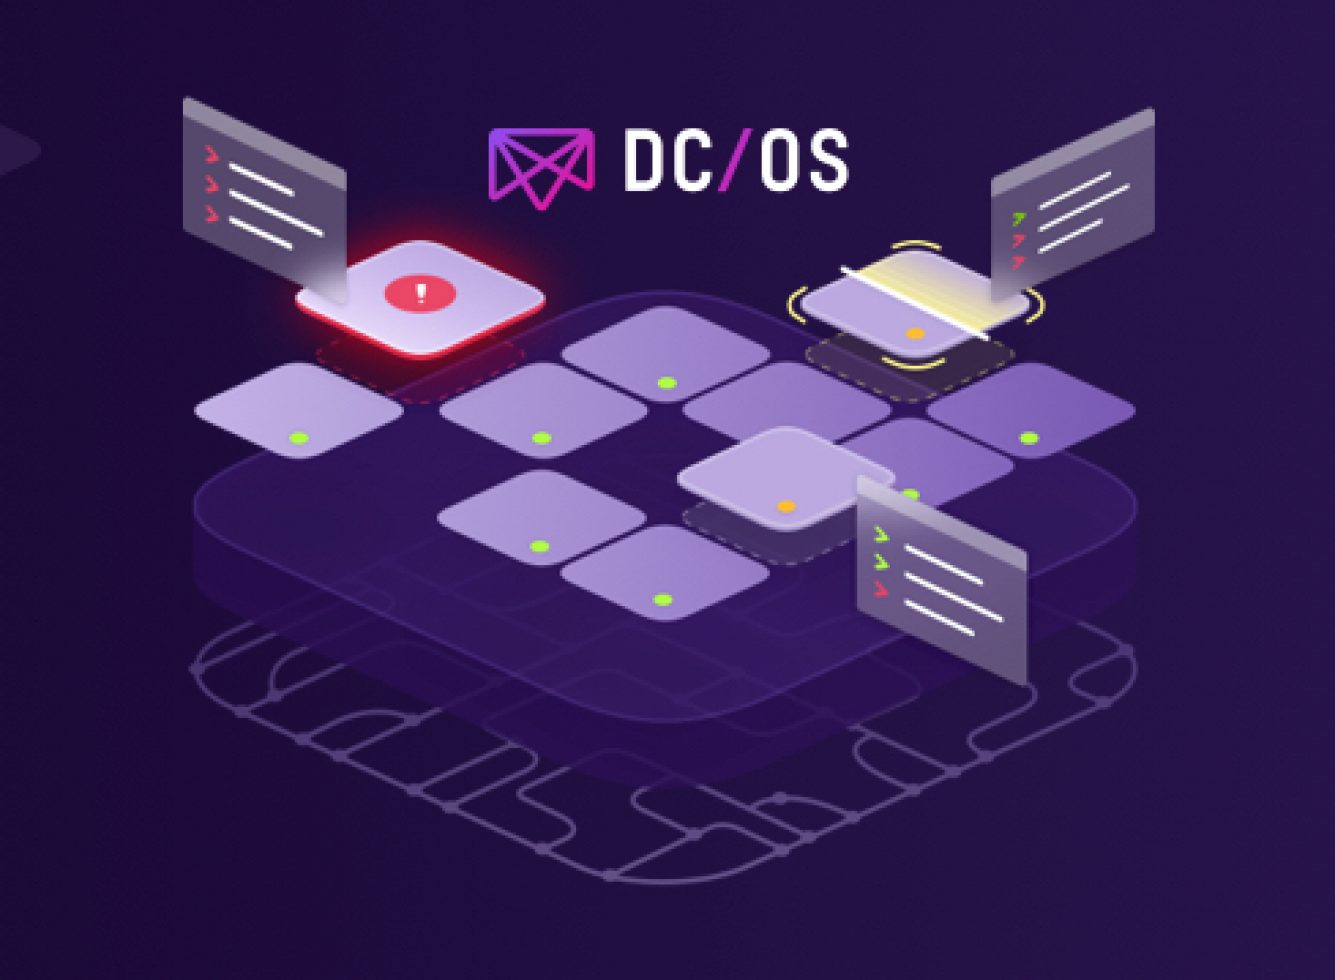 Data Centre Operating System DC/OS – How to Scale at “Scale” and How to Save Cost?